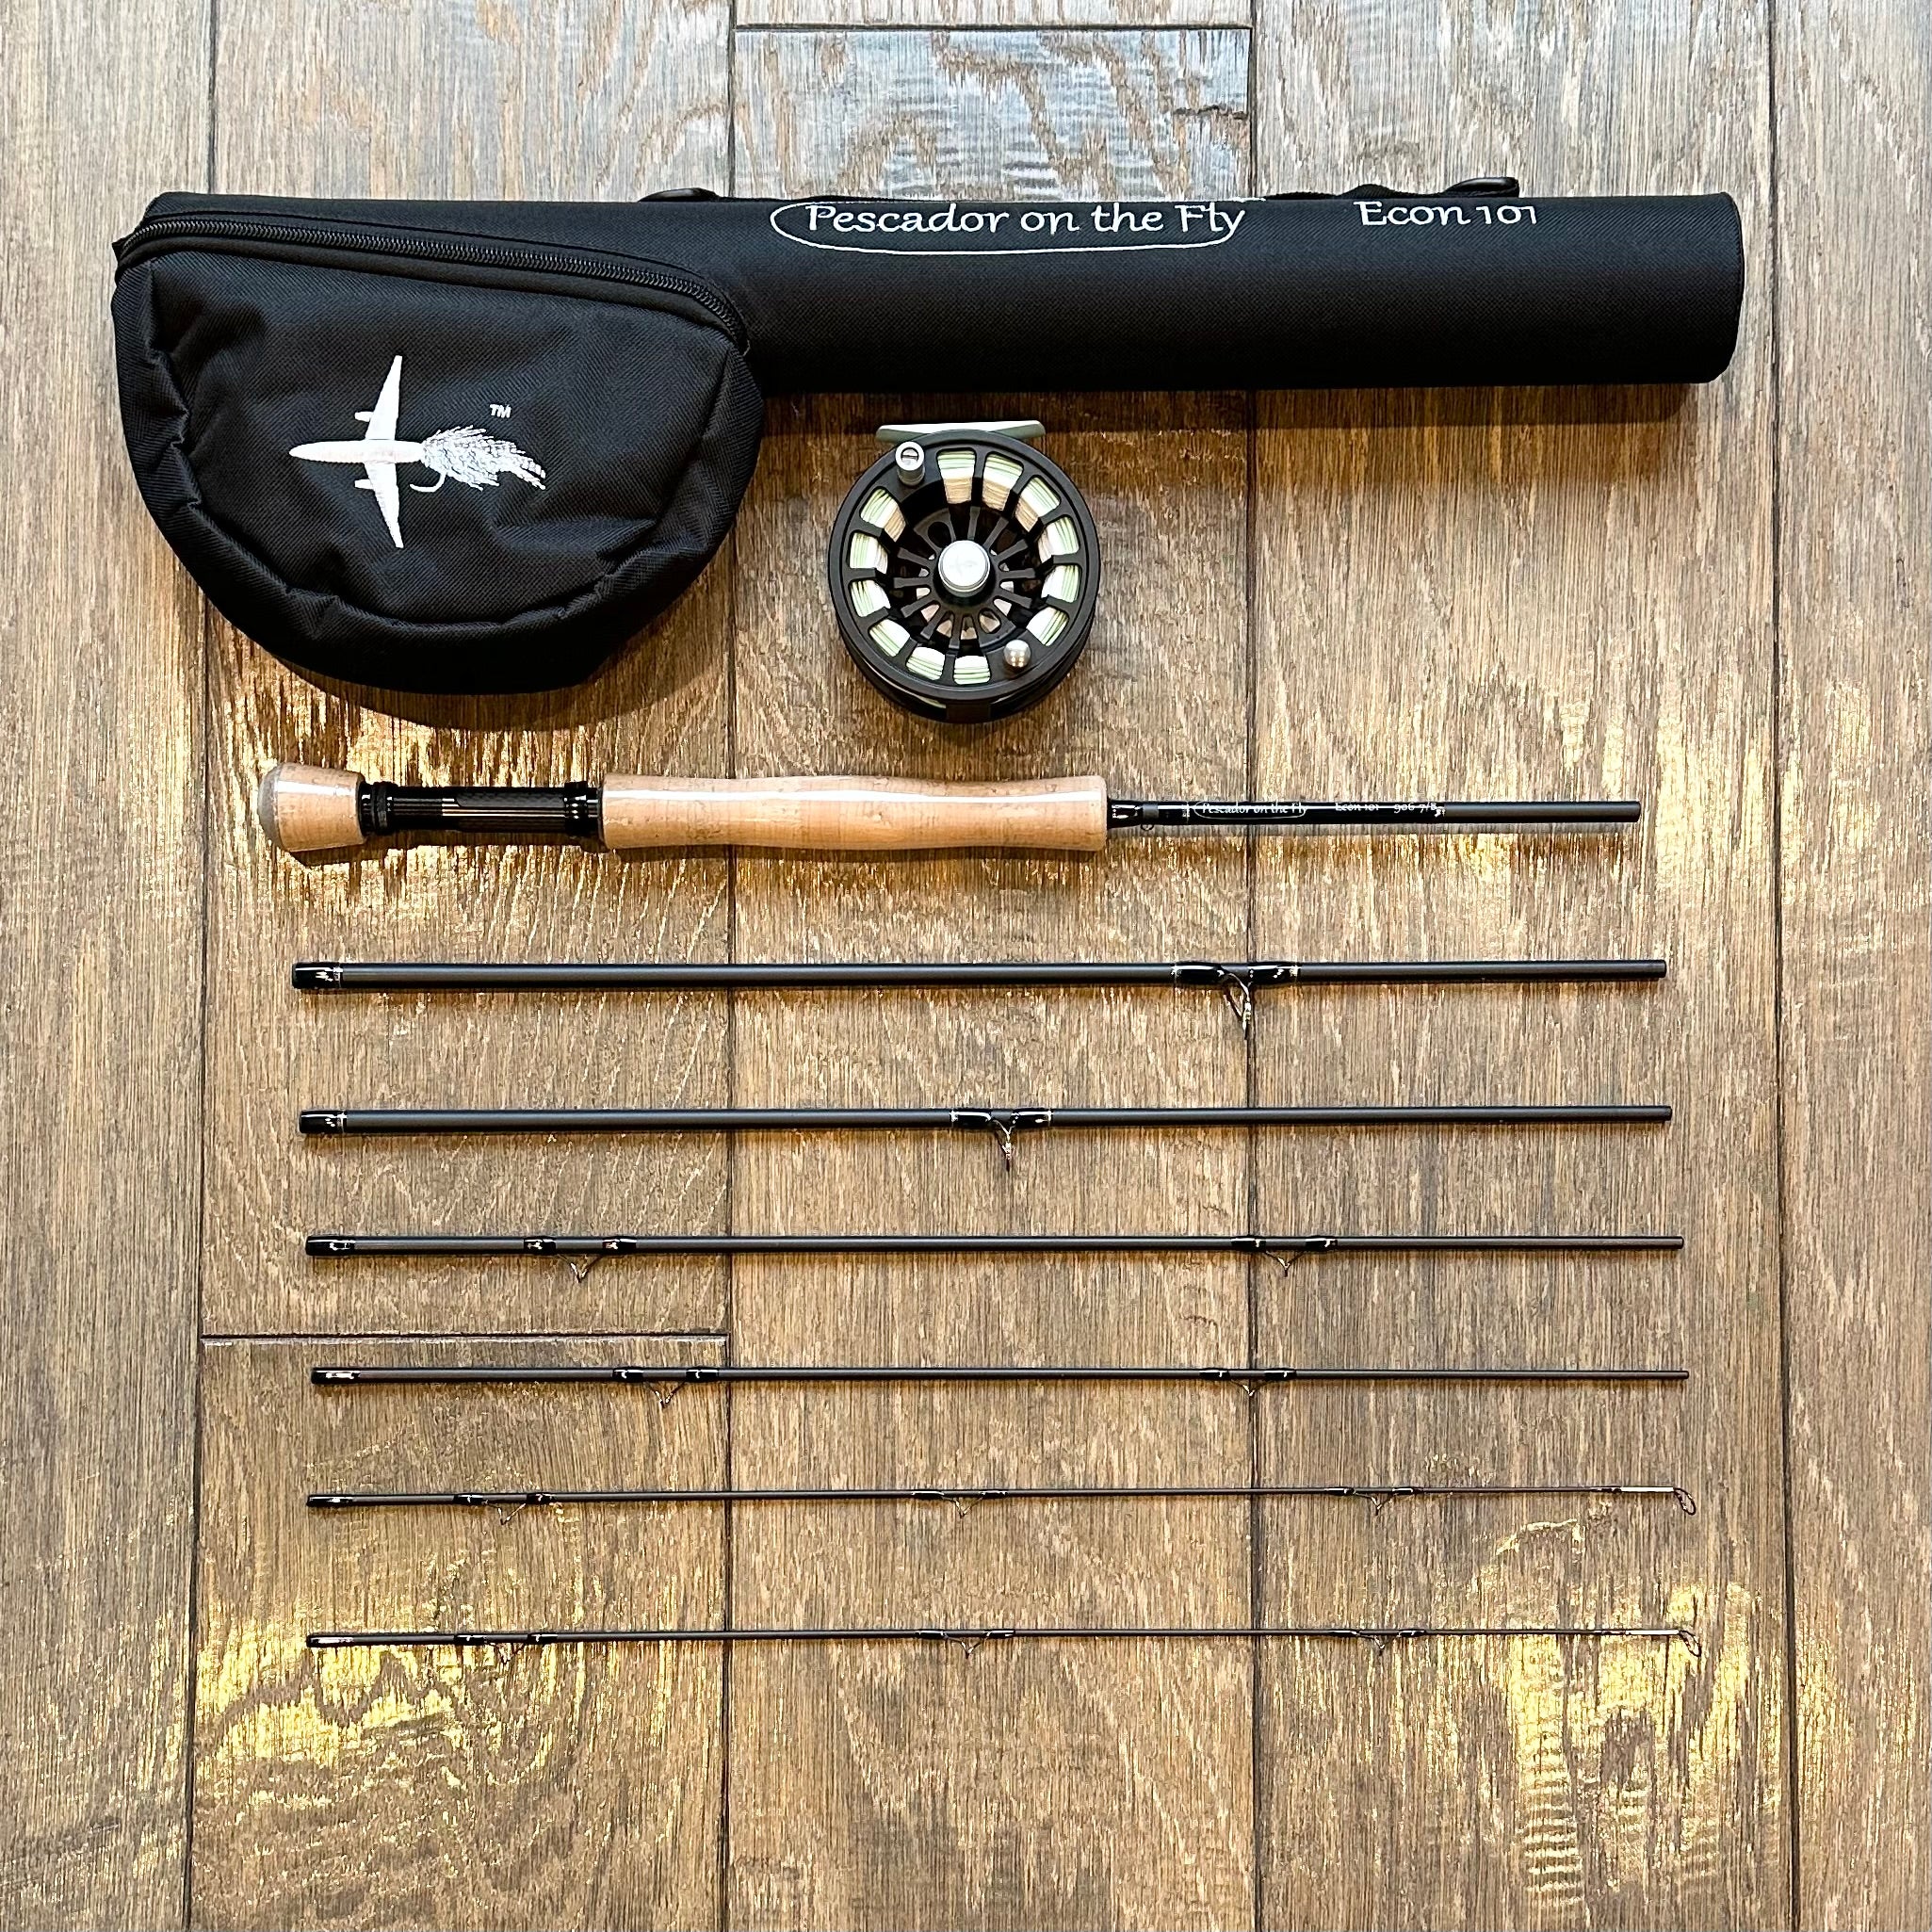 ECON 101 Packable Fly Fishing Starter Combo Package | 906-8 | 9' Six Section Portable 8 Weight Fly Rod And Reel Outfit